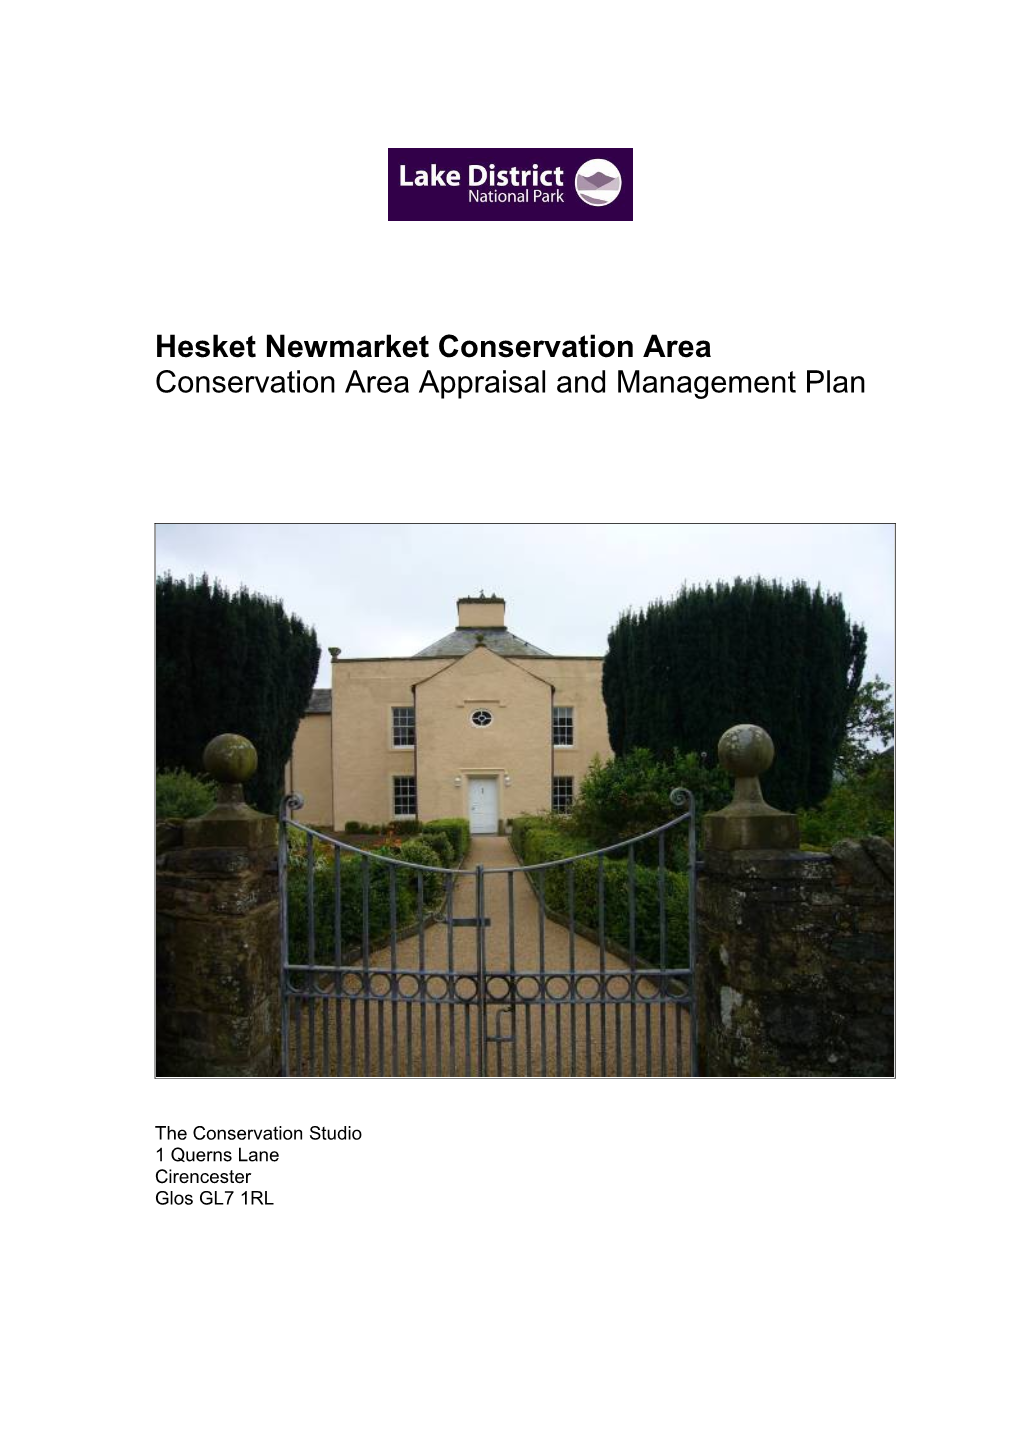 Lake Districtnational Parkauthority: Hesket Newmarket Conservation Area Appraisal & Management